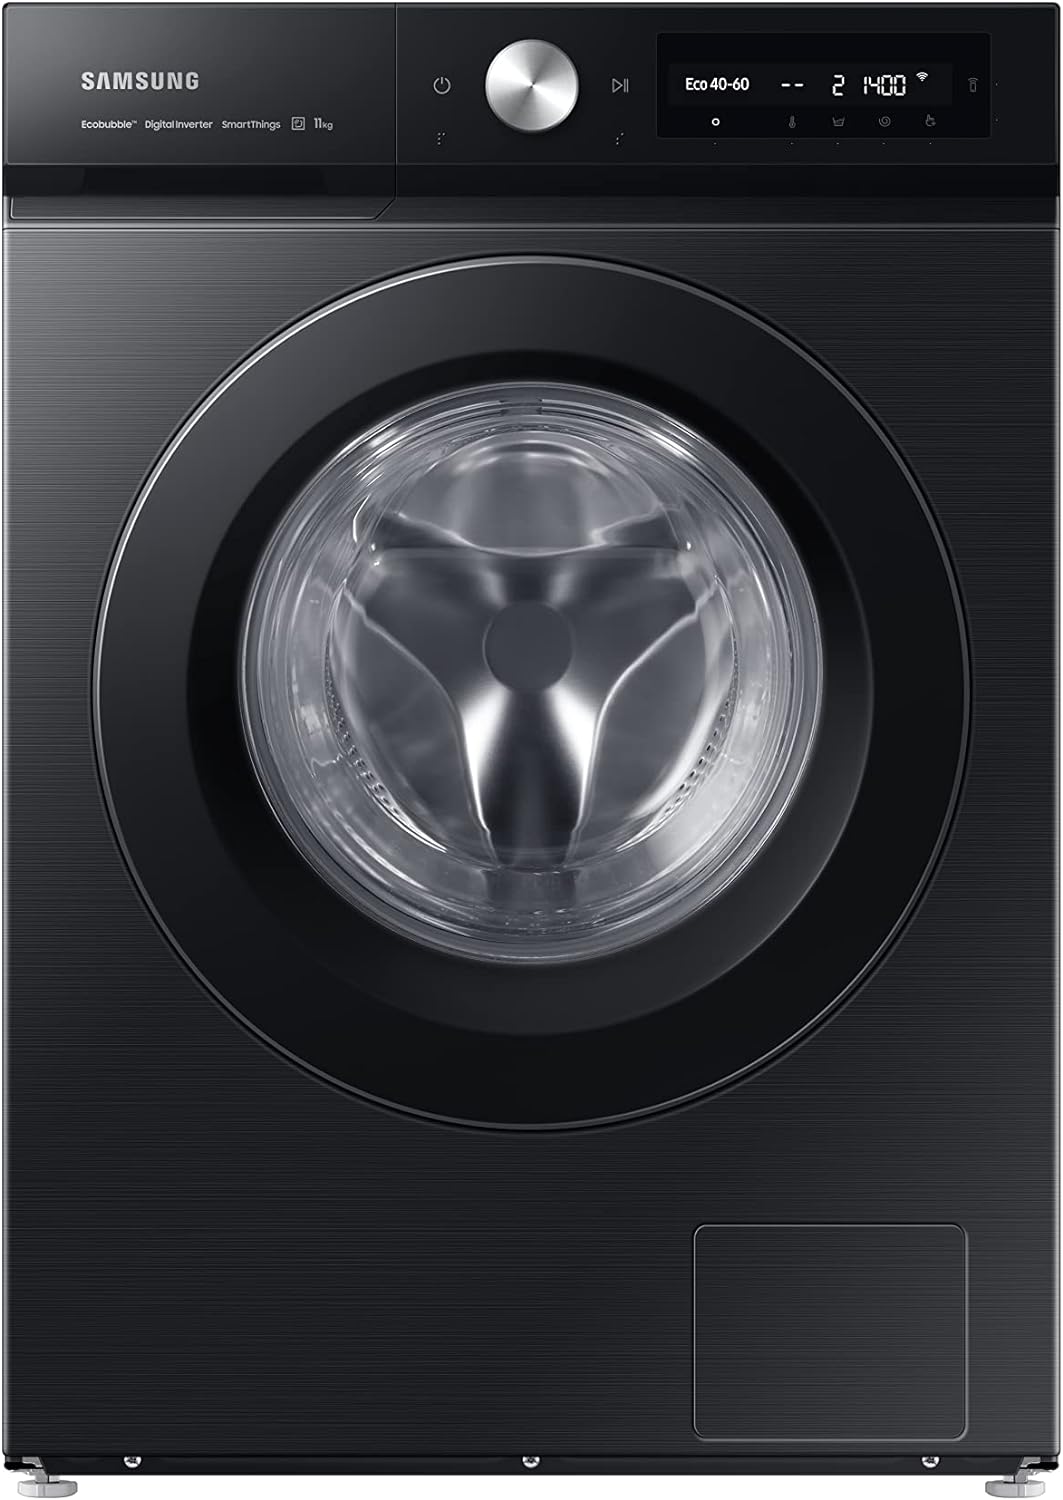 Samsung Series 6 AddWash AutoDose WW10T684DLN Wifi Connected 10.5Kg Washing Machine with 1400 rpm - Graphite - A Rated [Energy Class A] - Amazing Gadgets Outlet